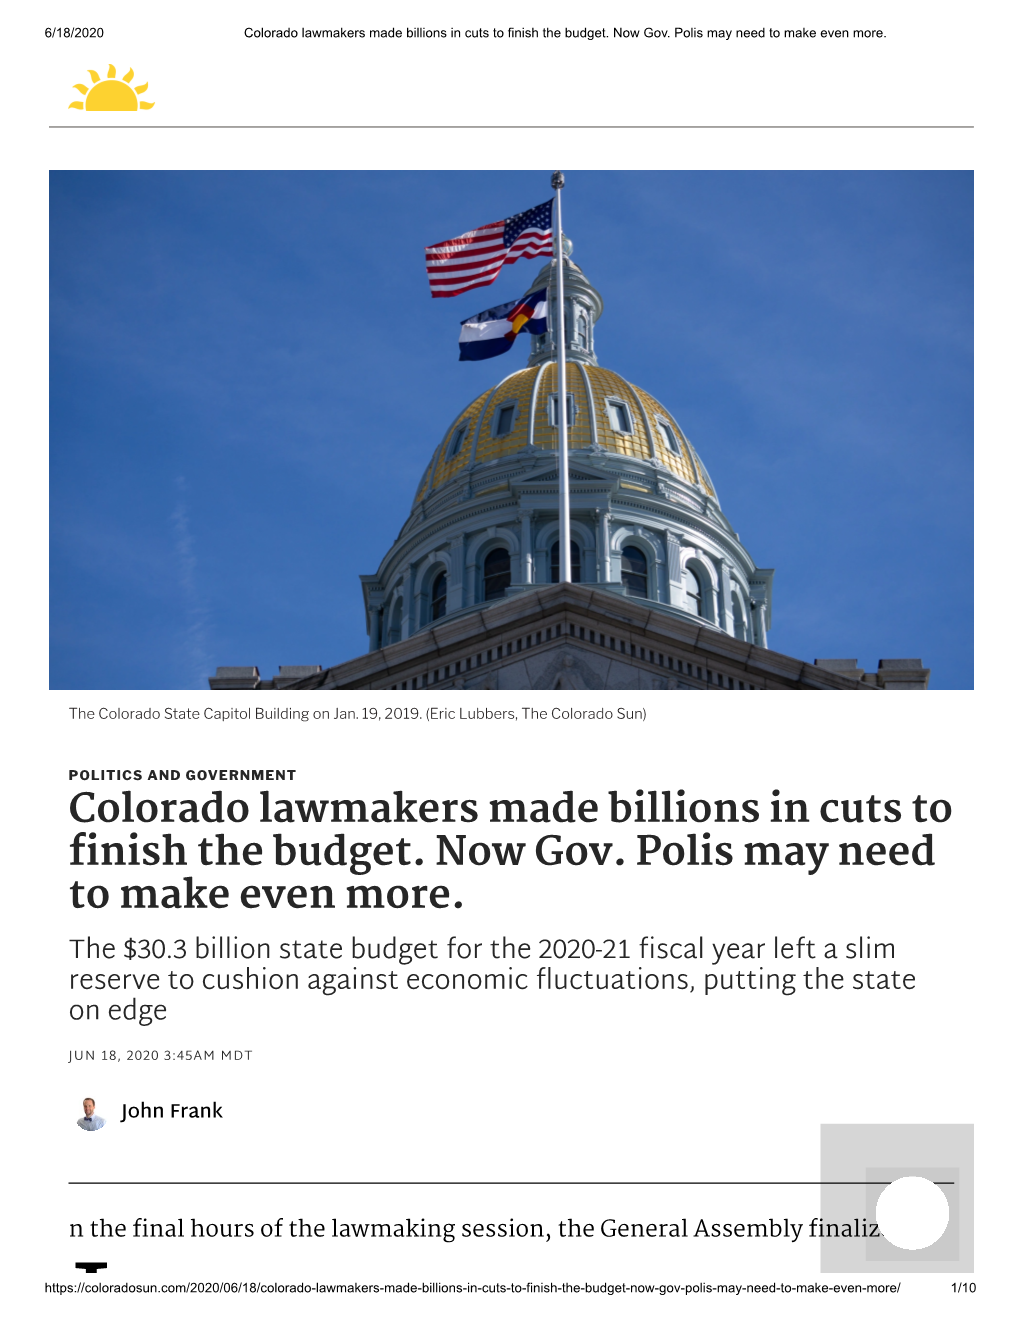 Colorado Lawmakers Made Billions in Cuts to Finish the Budget. Now Gov